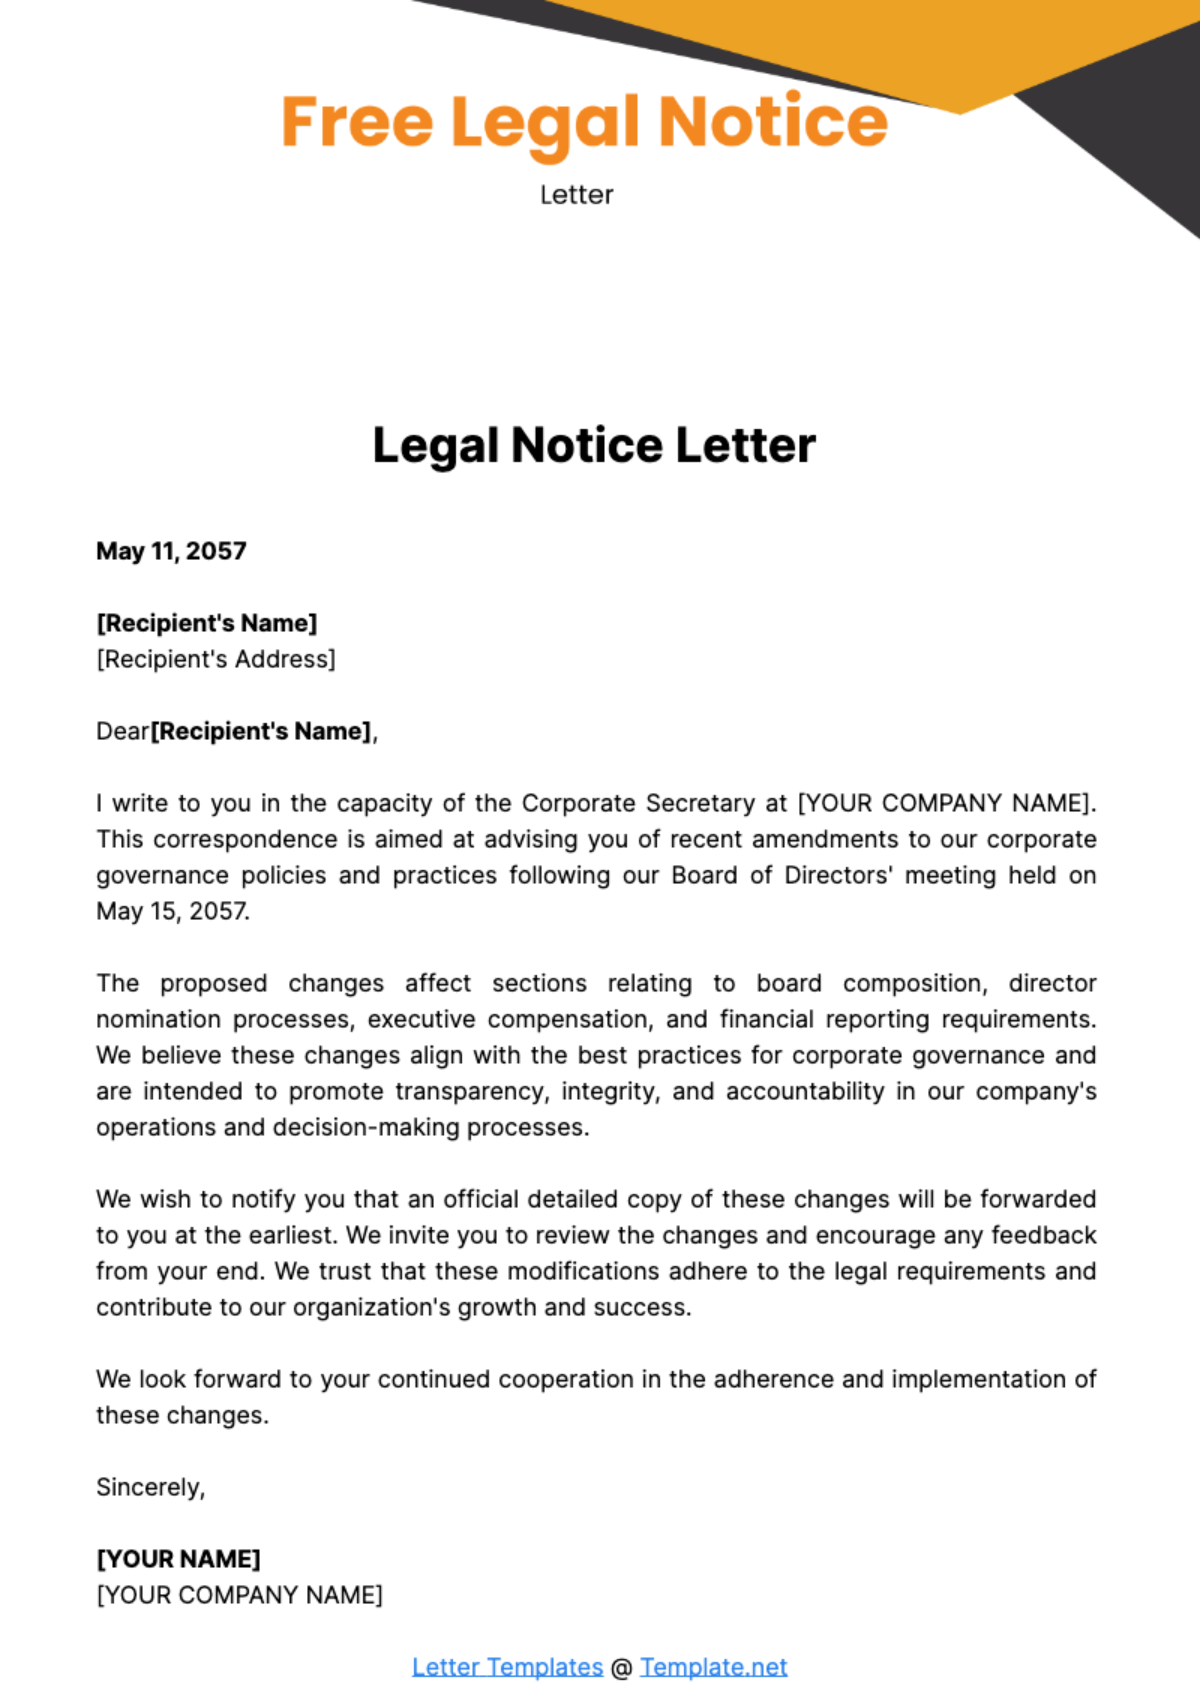 Free Legal Notice Letter Template